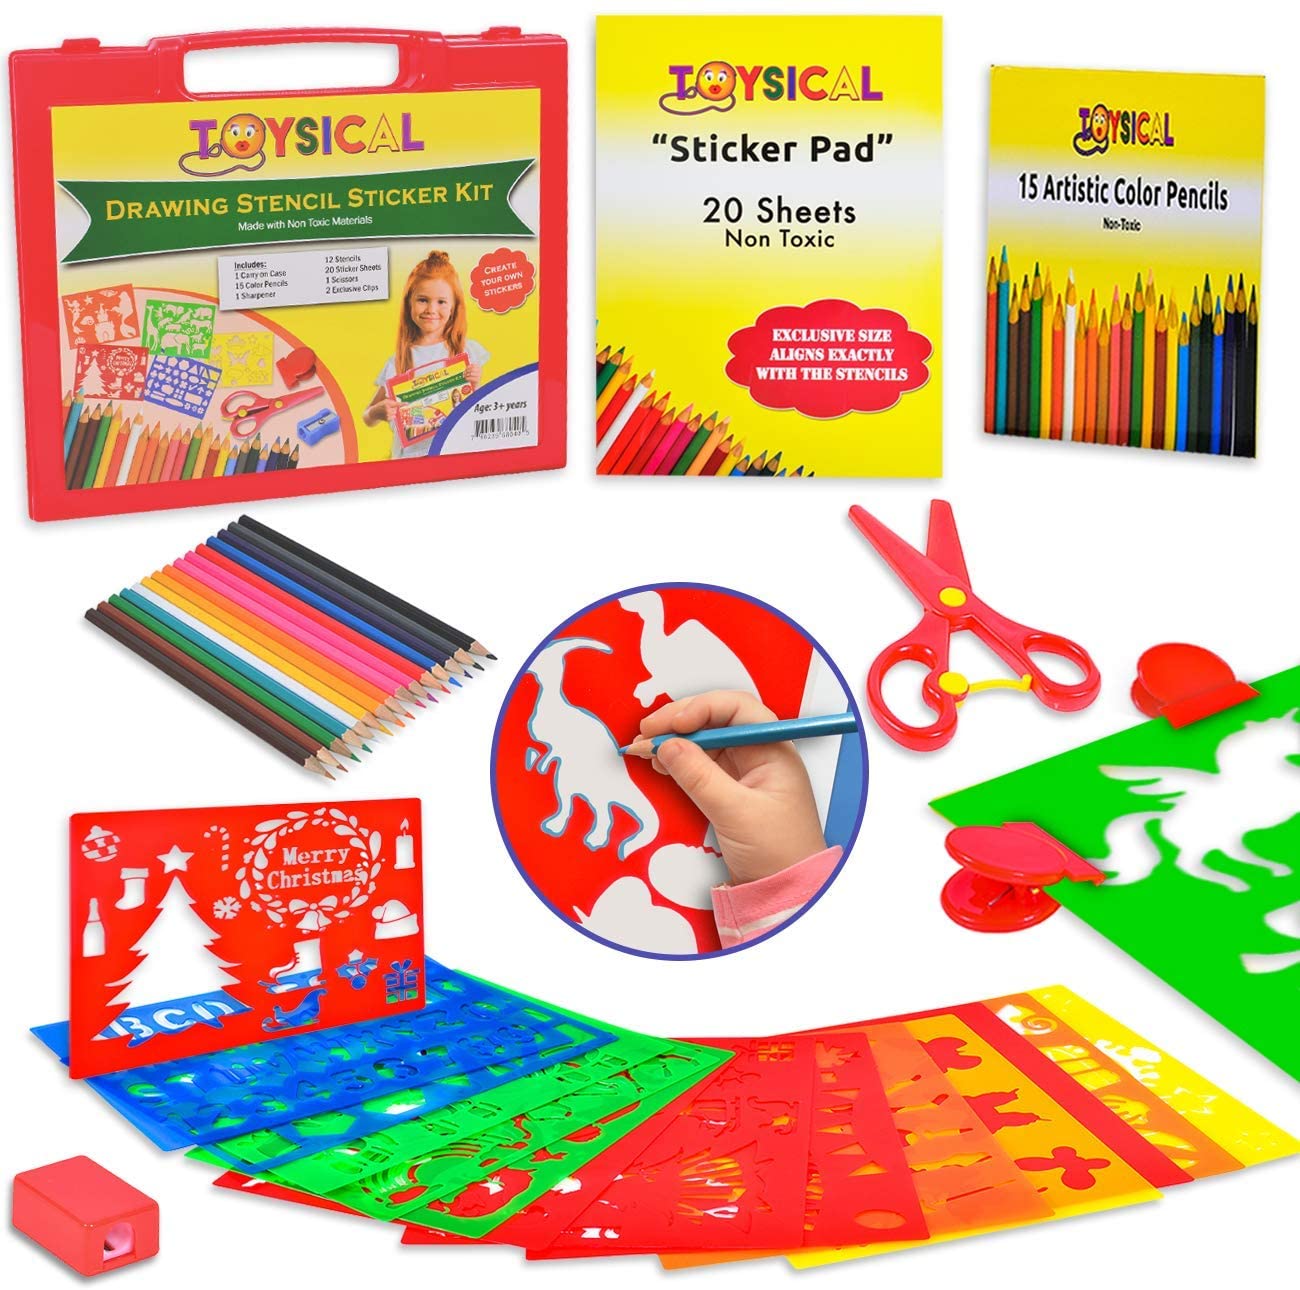 Toysical Drawing Stencils Set for Kids with Sticker Sheets - Gifts for